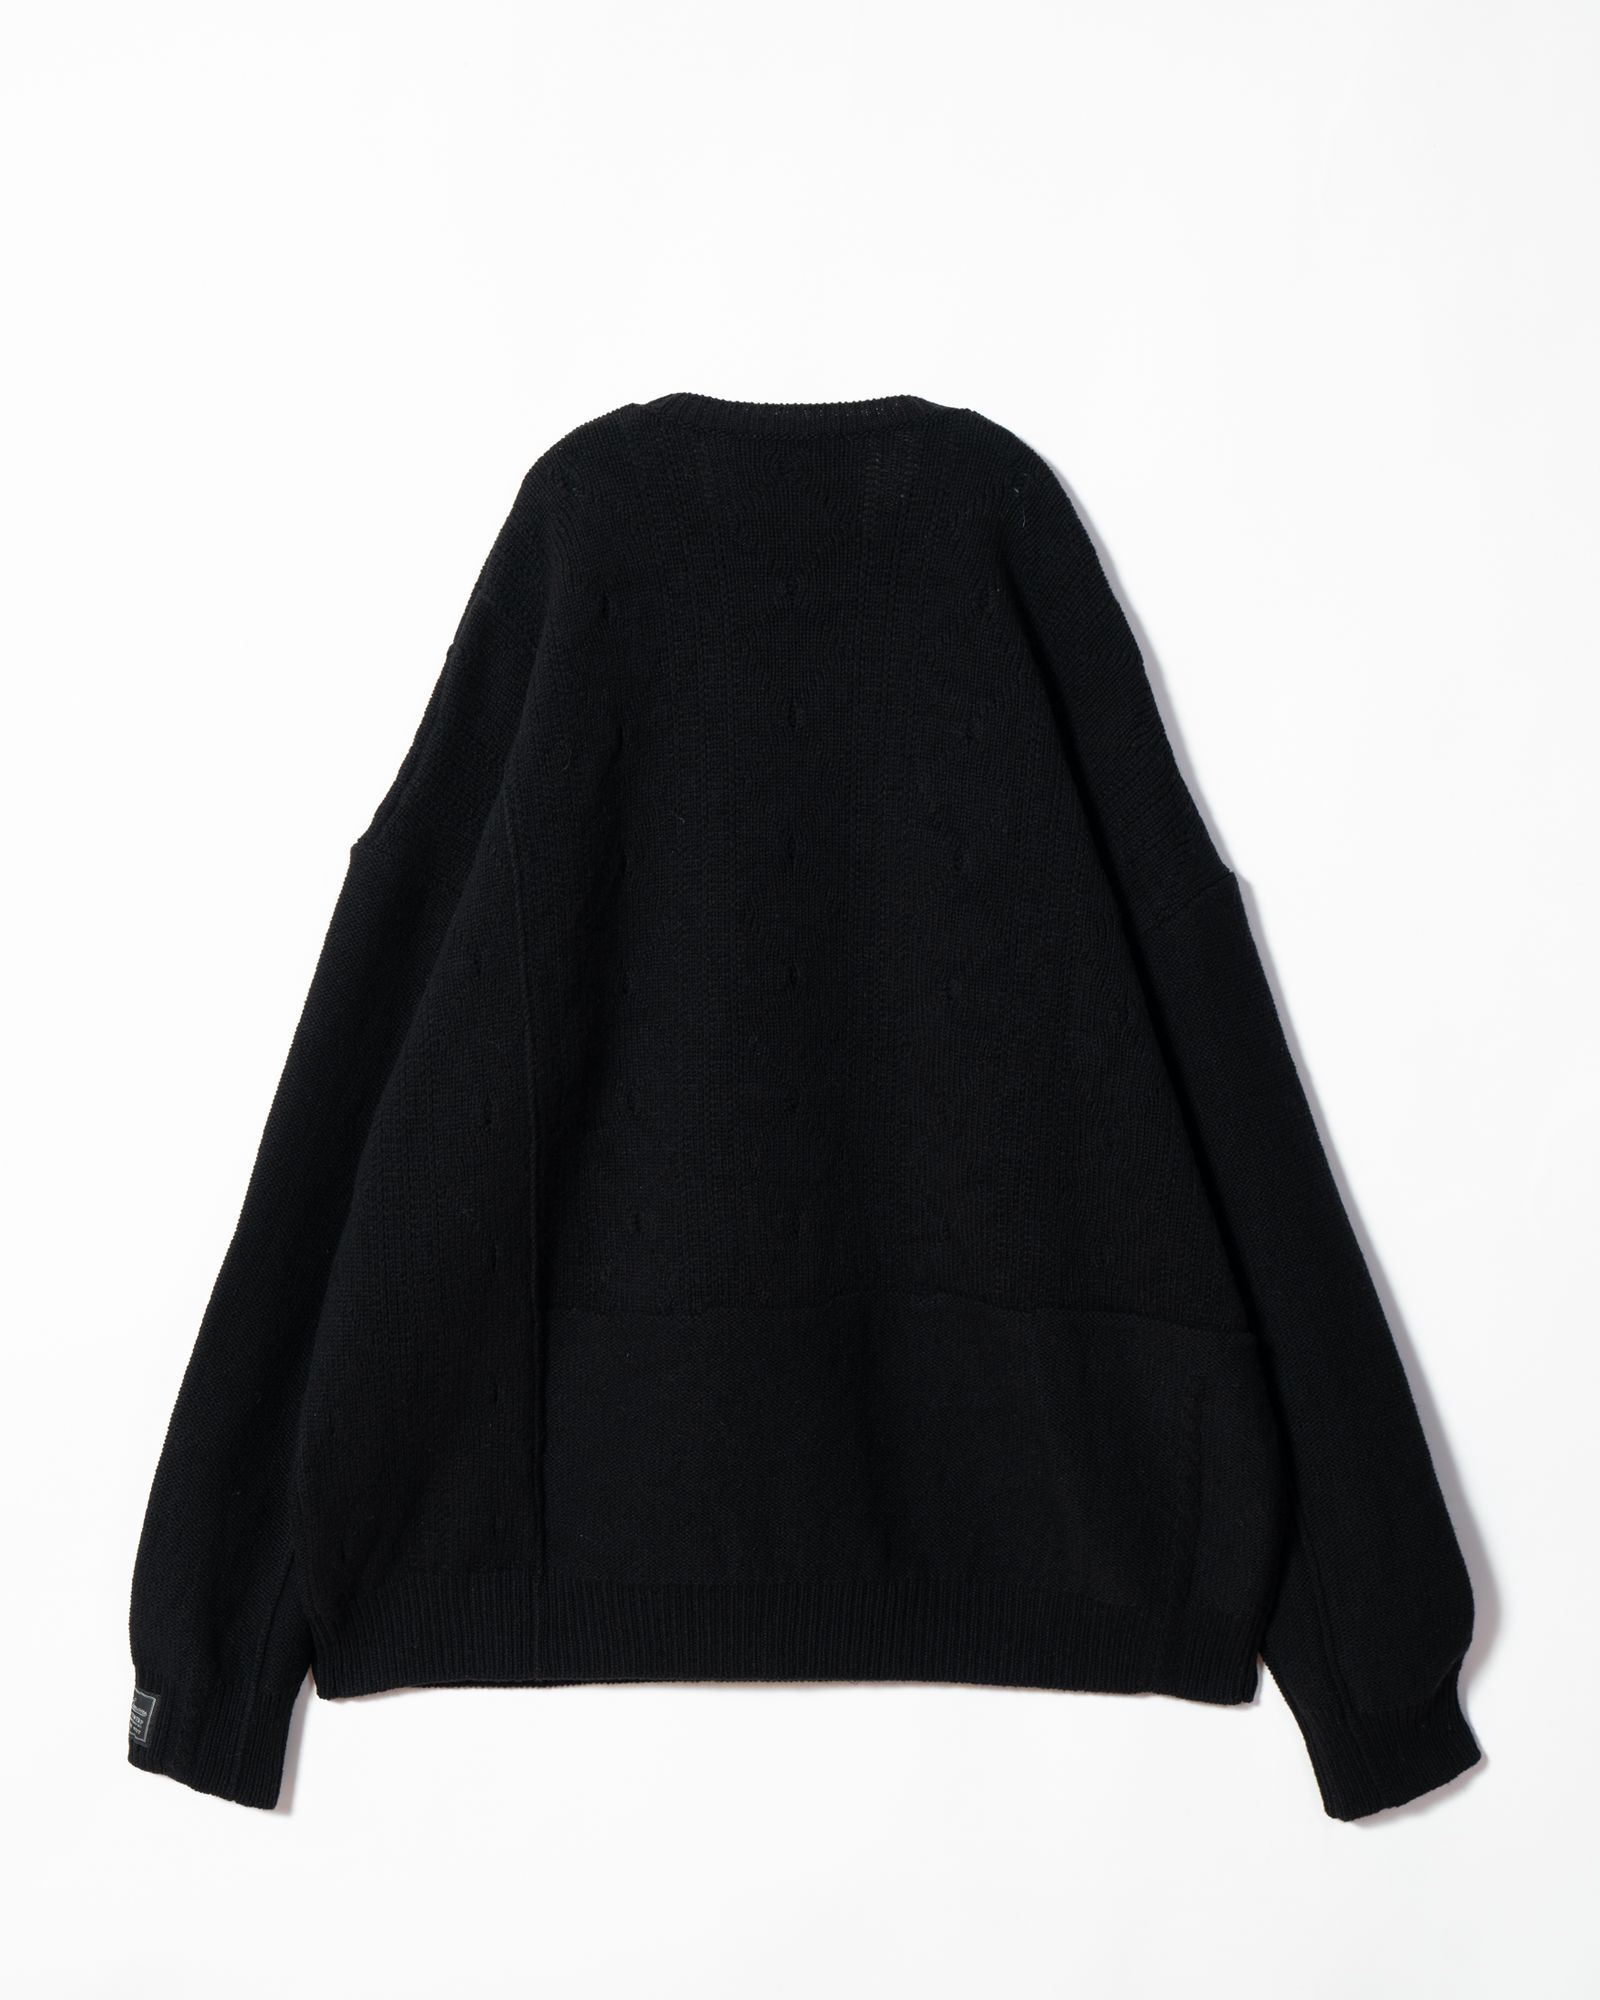 RAF SIMONS - Loose fit braid relief roundneck sweater printed